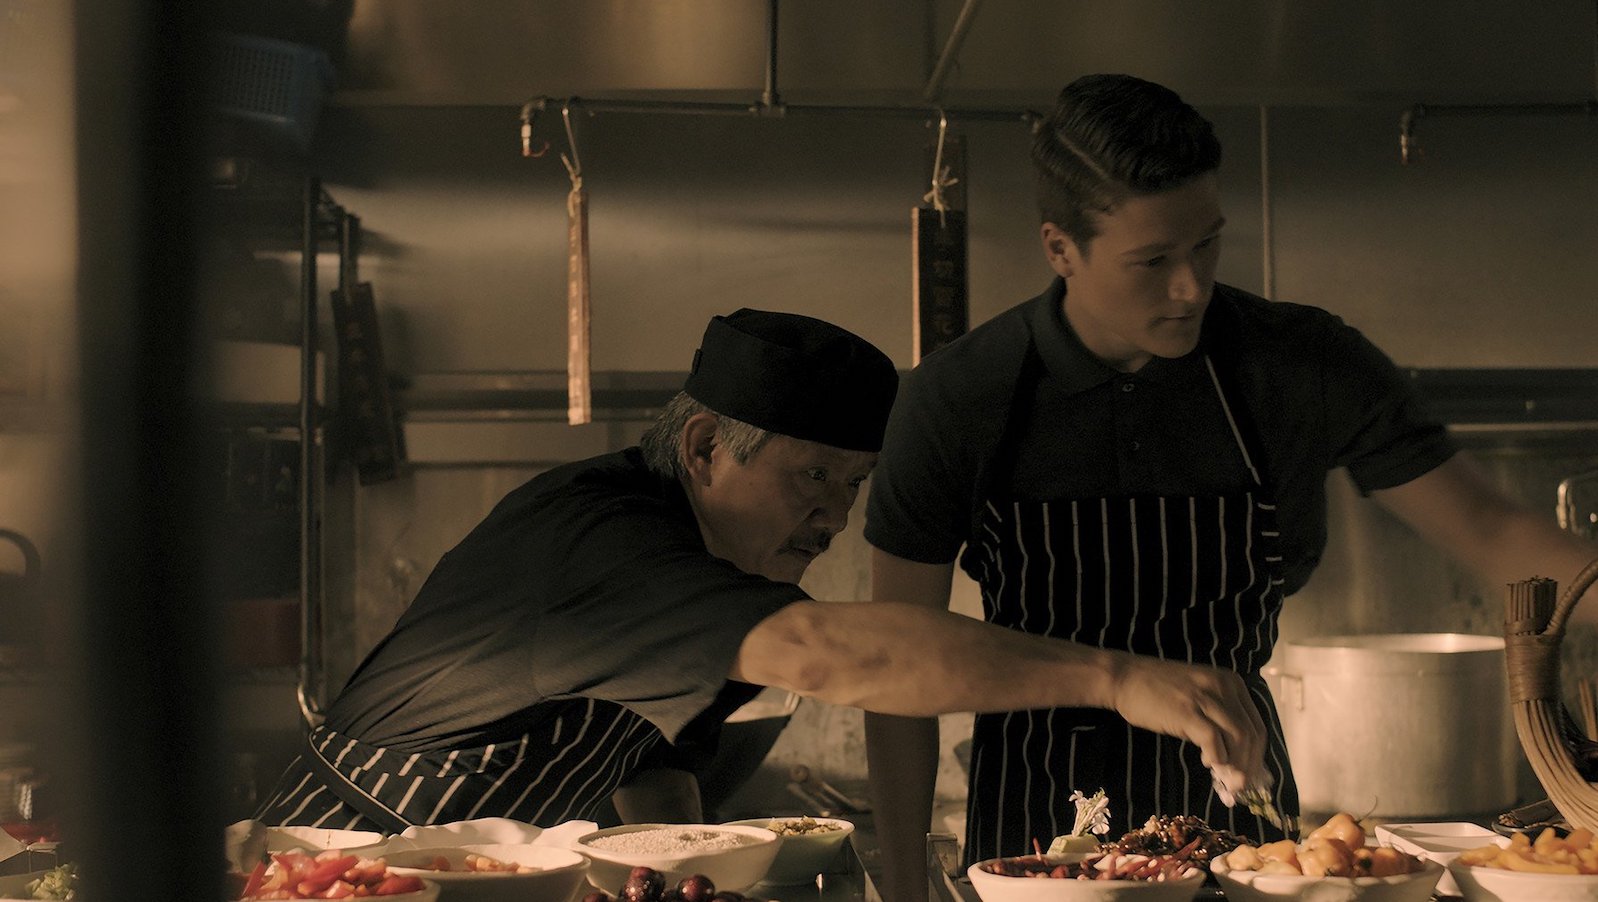 In a kitchen, an older chef reaches across a plate in front of a younger chef, whom he is instructing.